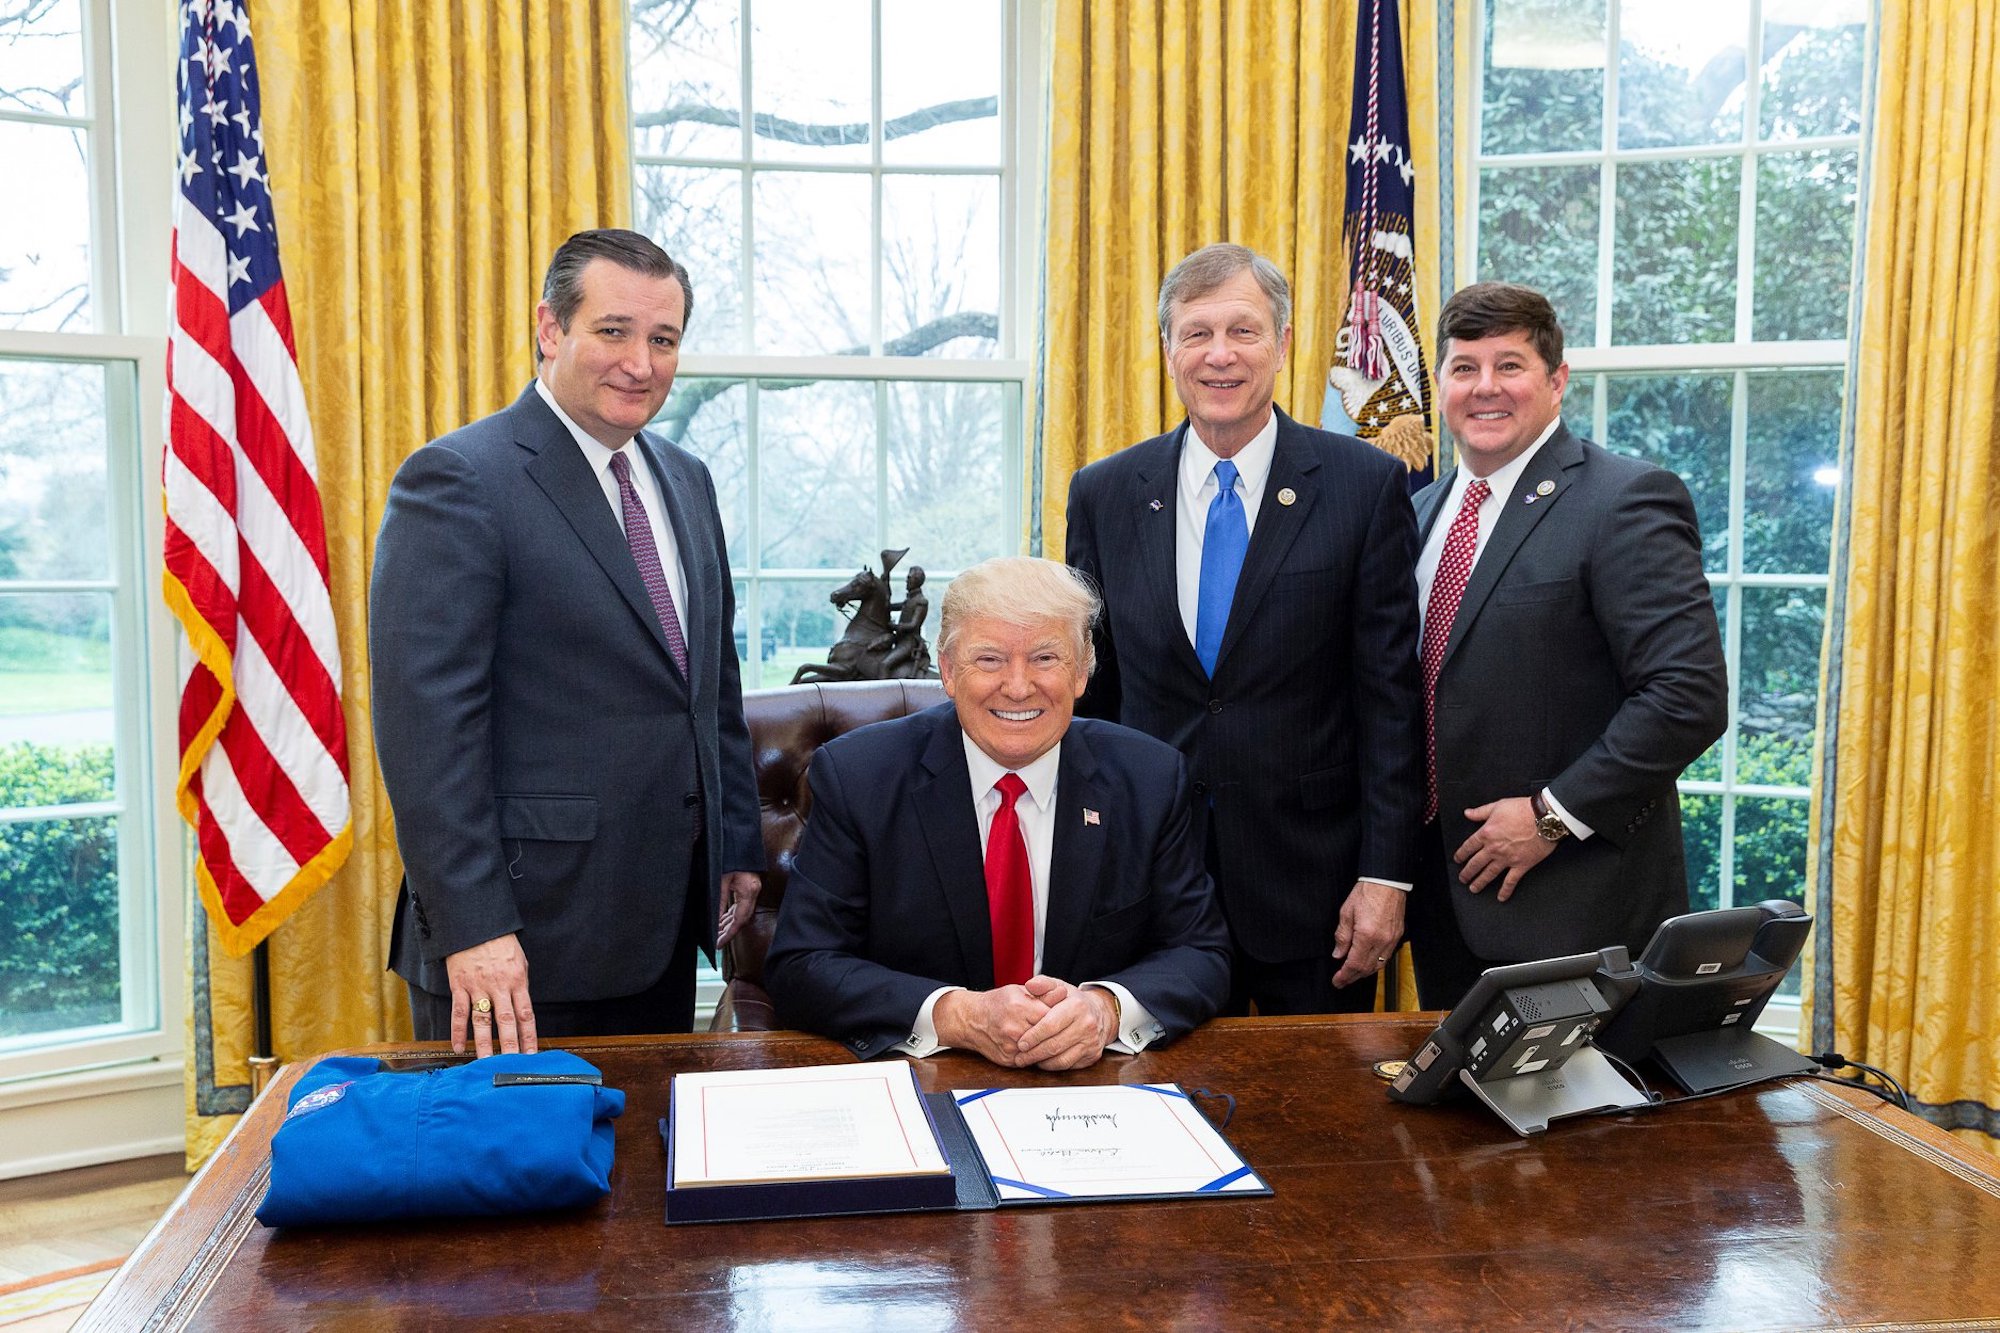 Steven Palazzo and Ted Cruz stand near then-president Trump in the Oval Office at the resolute desk